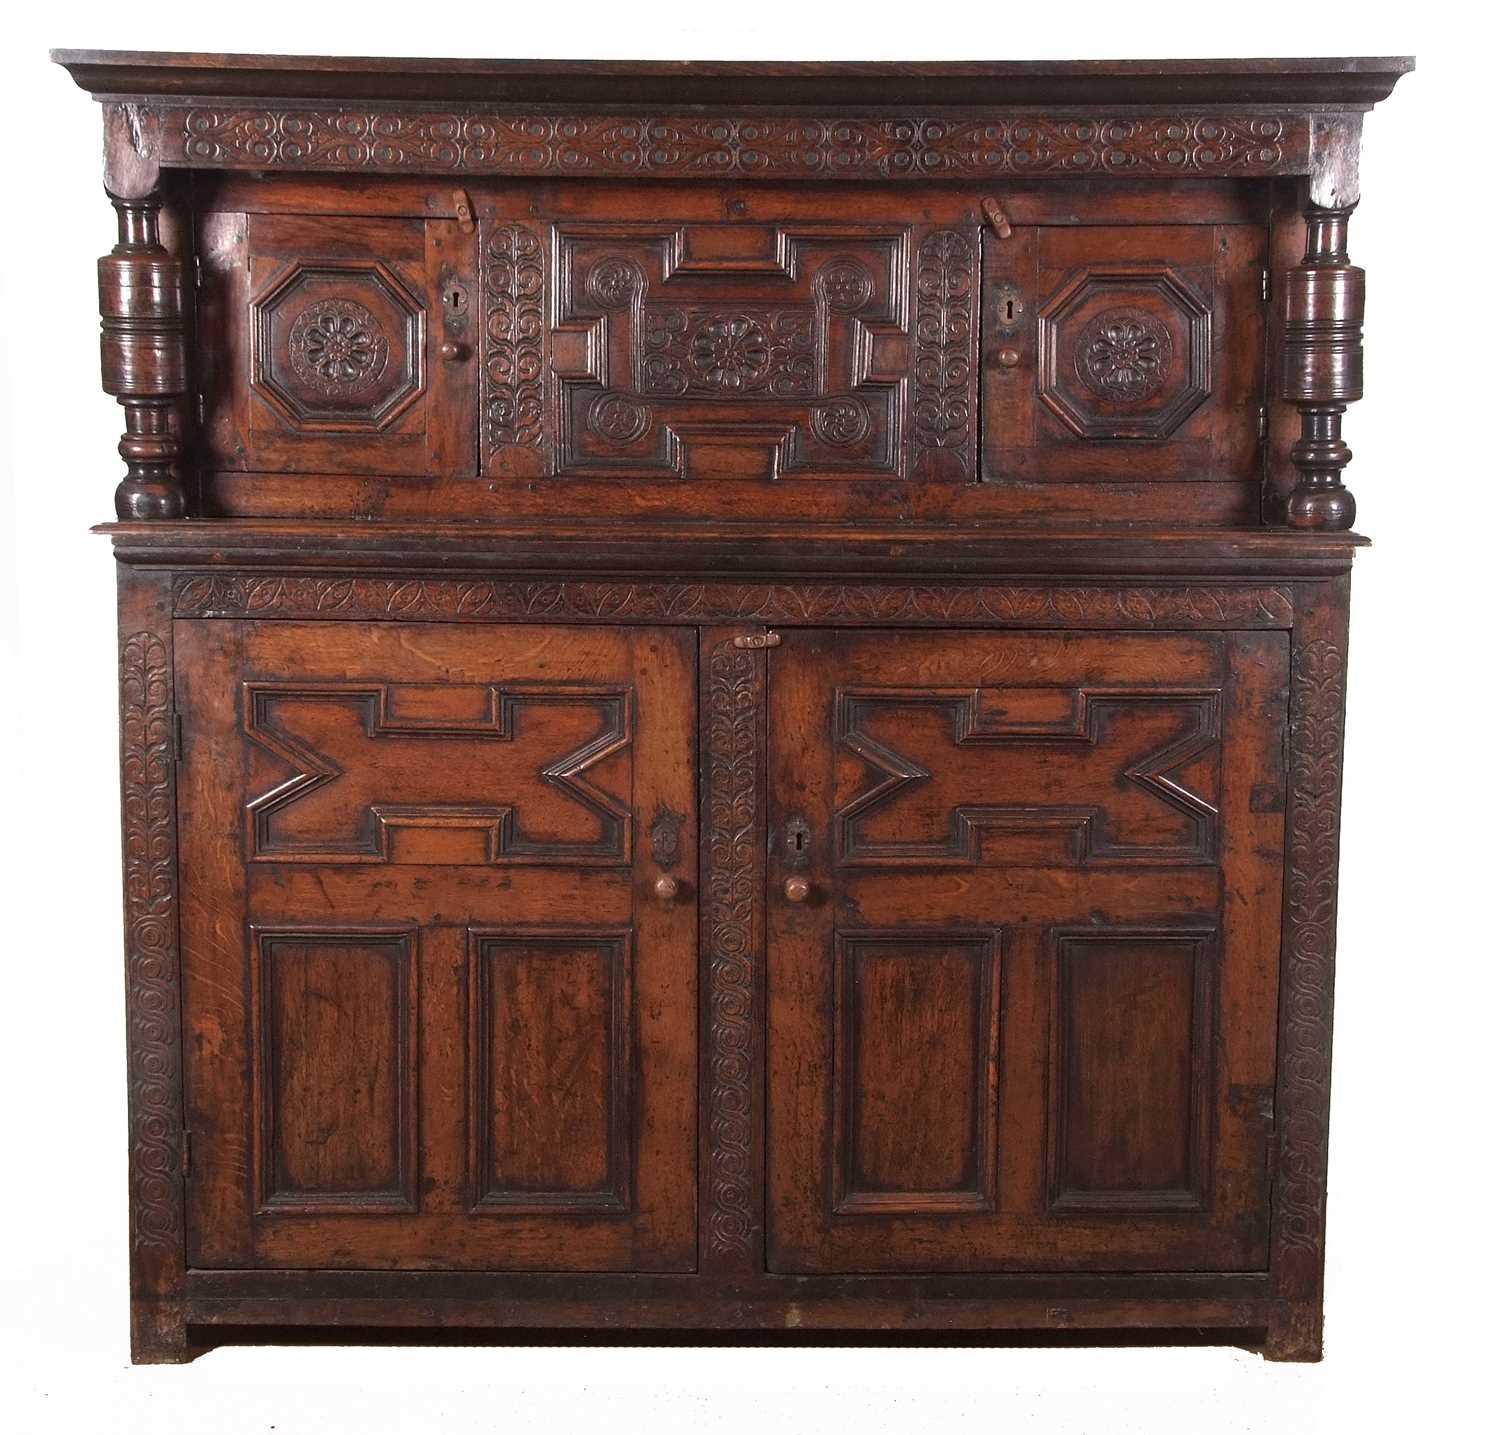 A large 17th Century oak court cupboard with moulded cornice over a top section with two panelled - Image 2 of 8